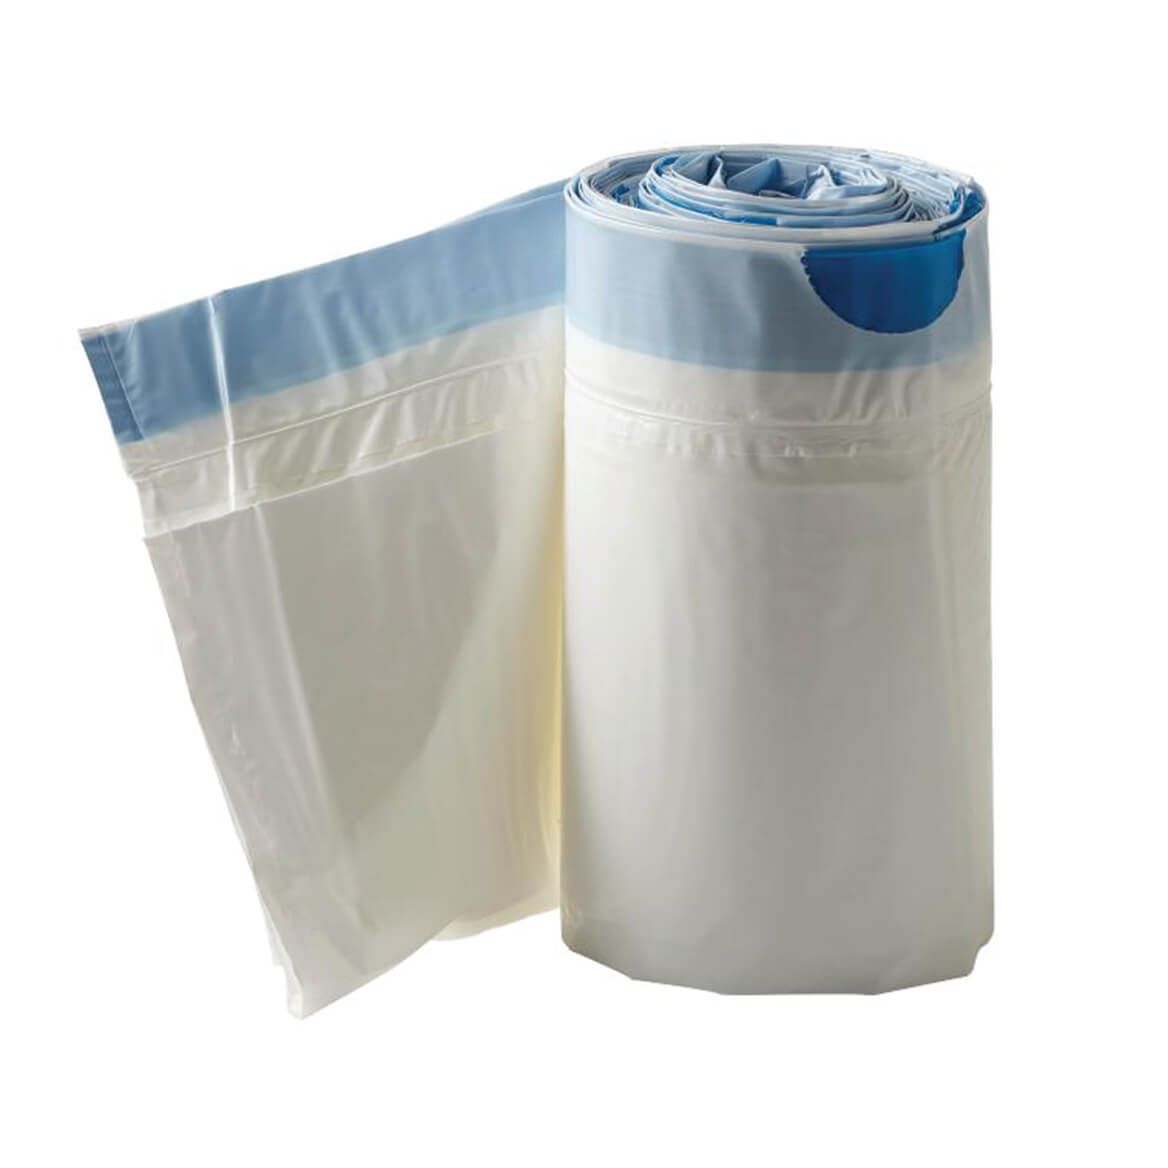 Commode Liners with Absorbent Pad, Box of 12 + '-' + 358003